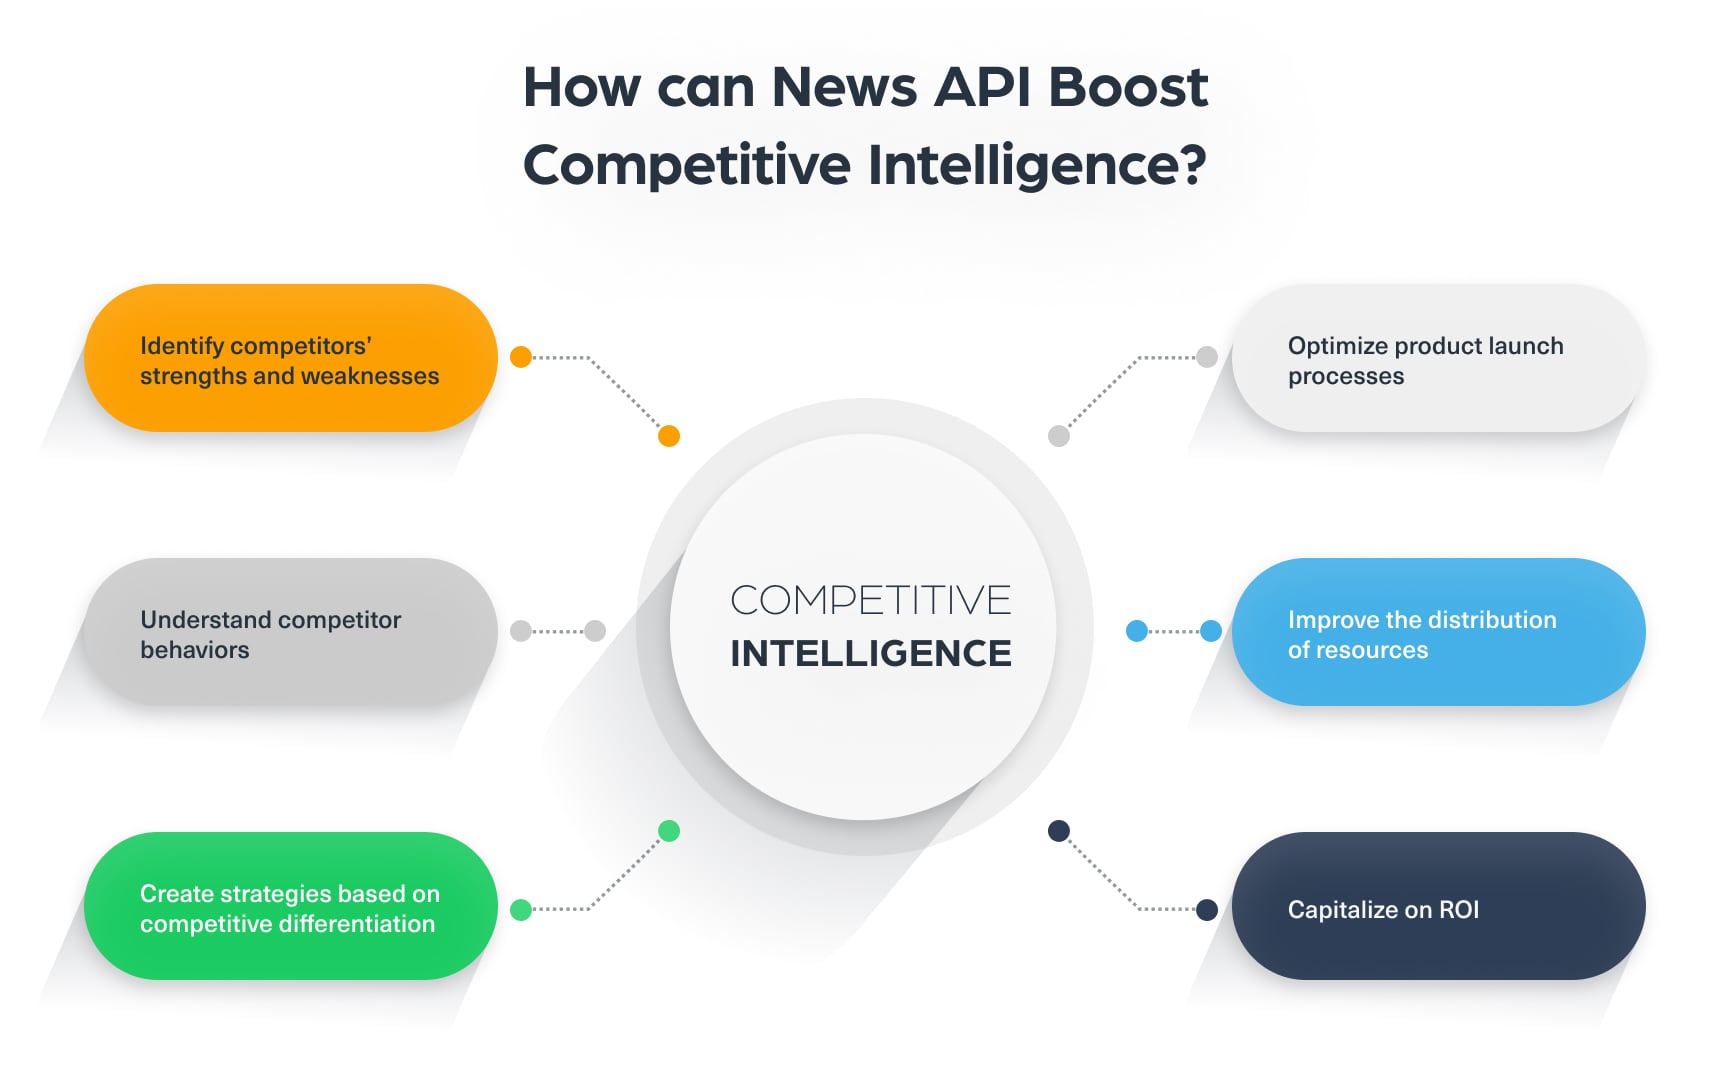 How can News API boost competitive intelligence?